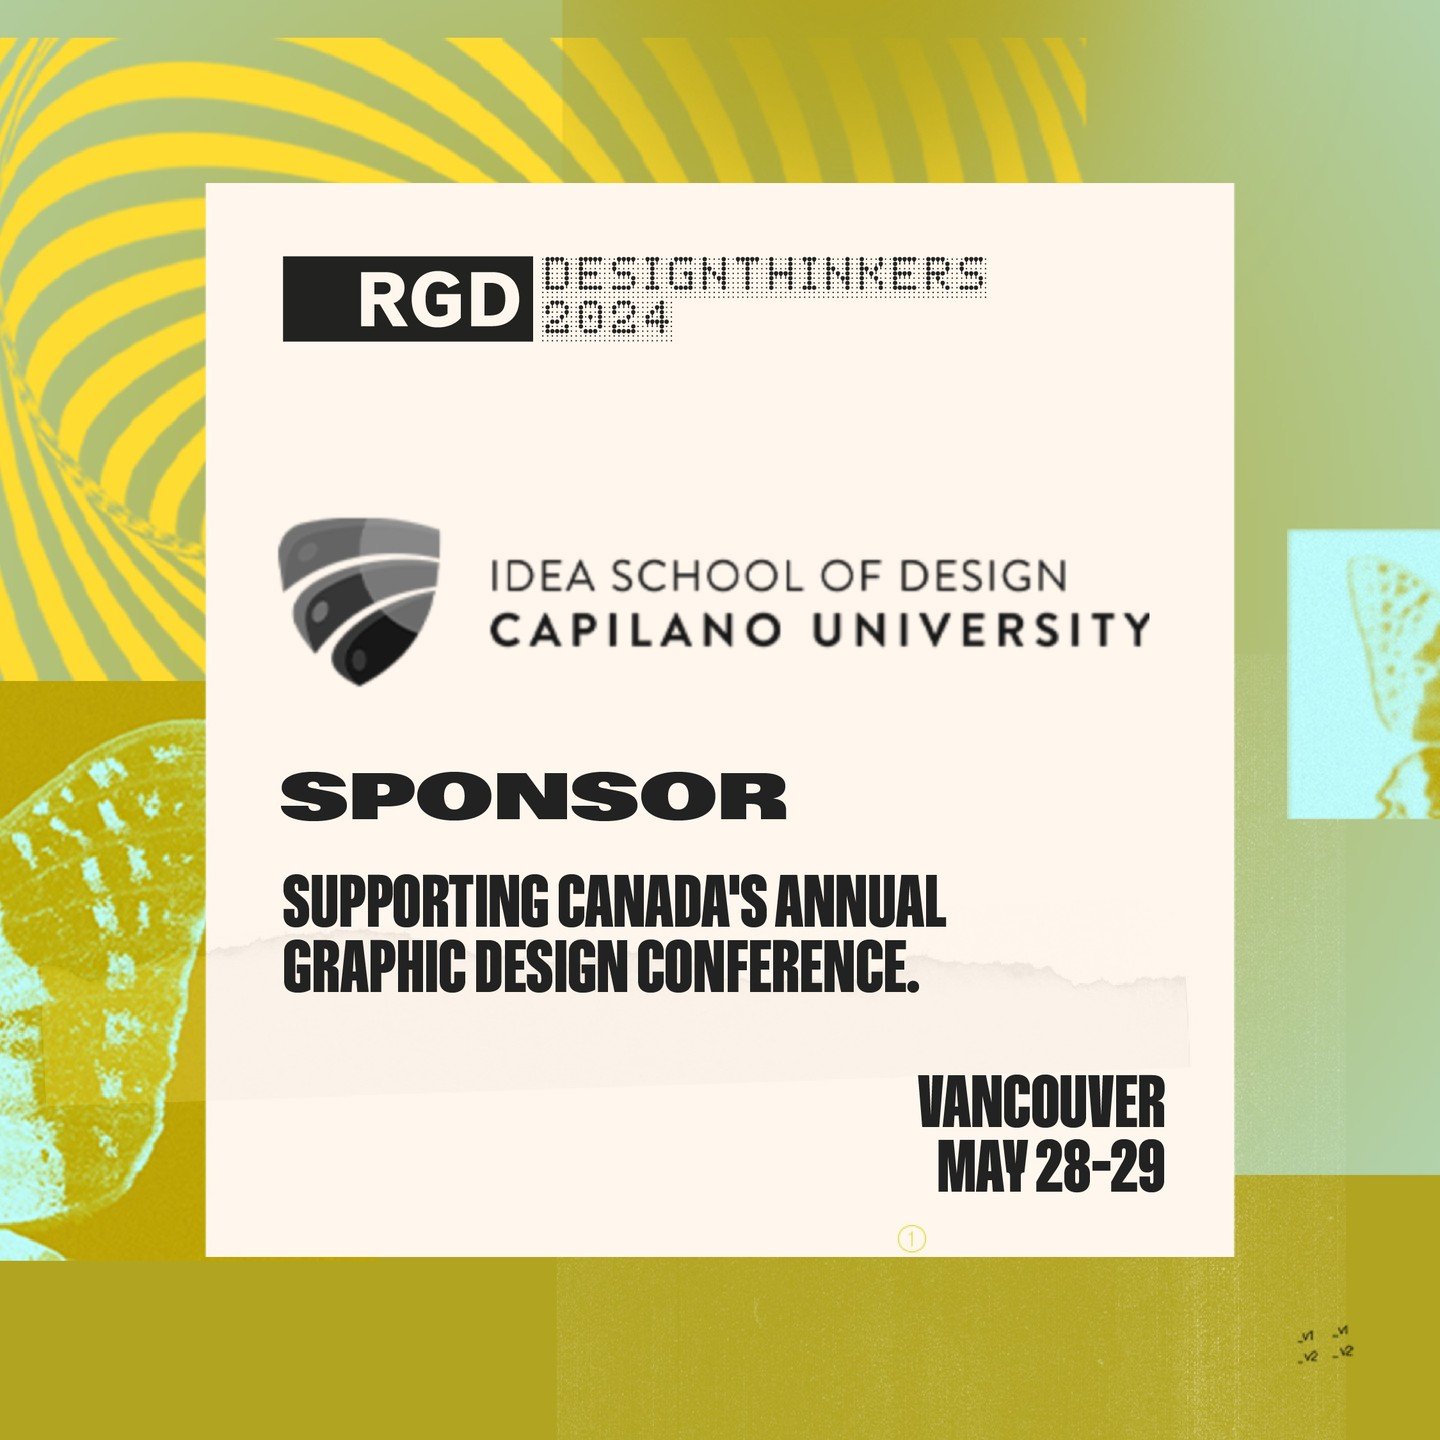 We're proud to support DesignThinkers, Canada&rsquo;s annual graphic design conference, in Vancouver this May 28&ndash;29!
This event offers a collective opportunity to examine and explore where design and the industry is heading
In-person and virtua